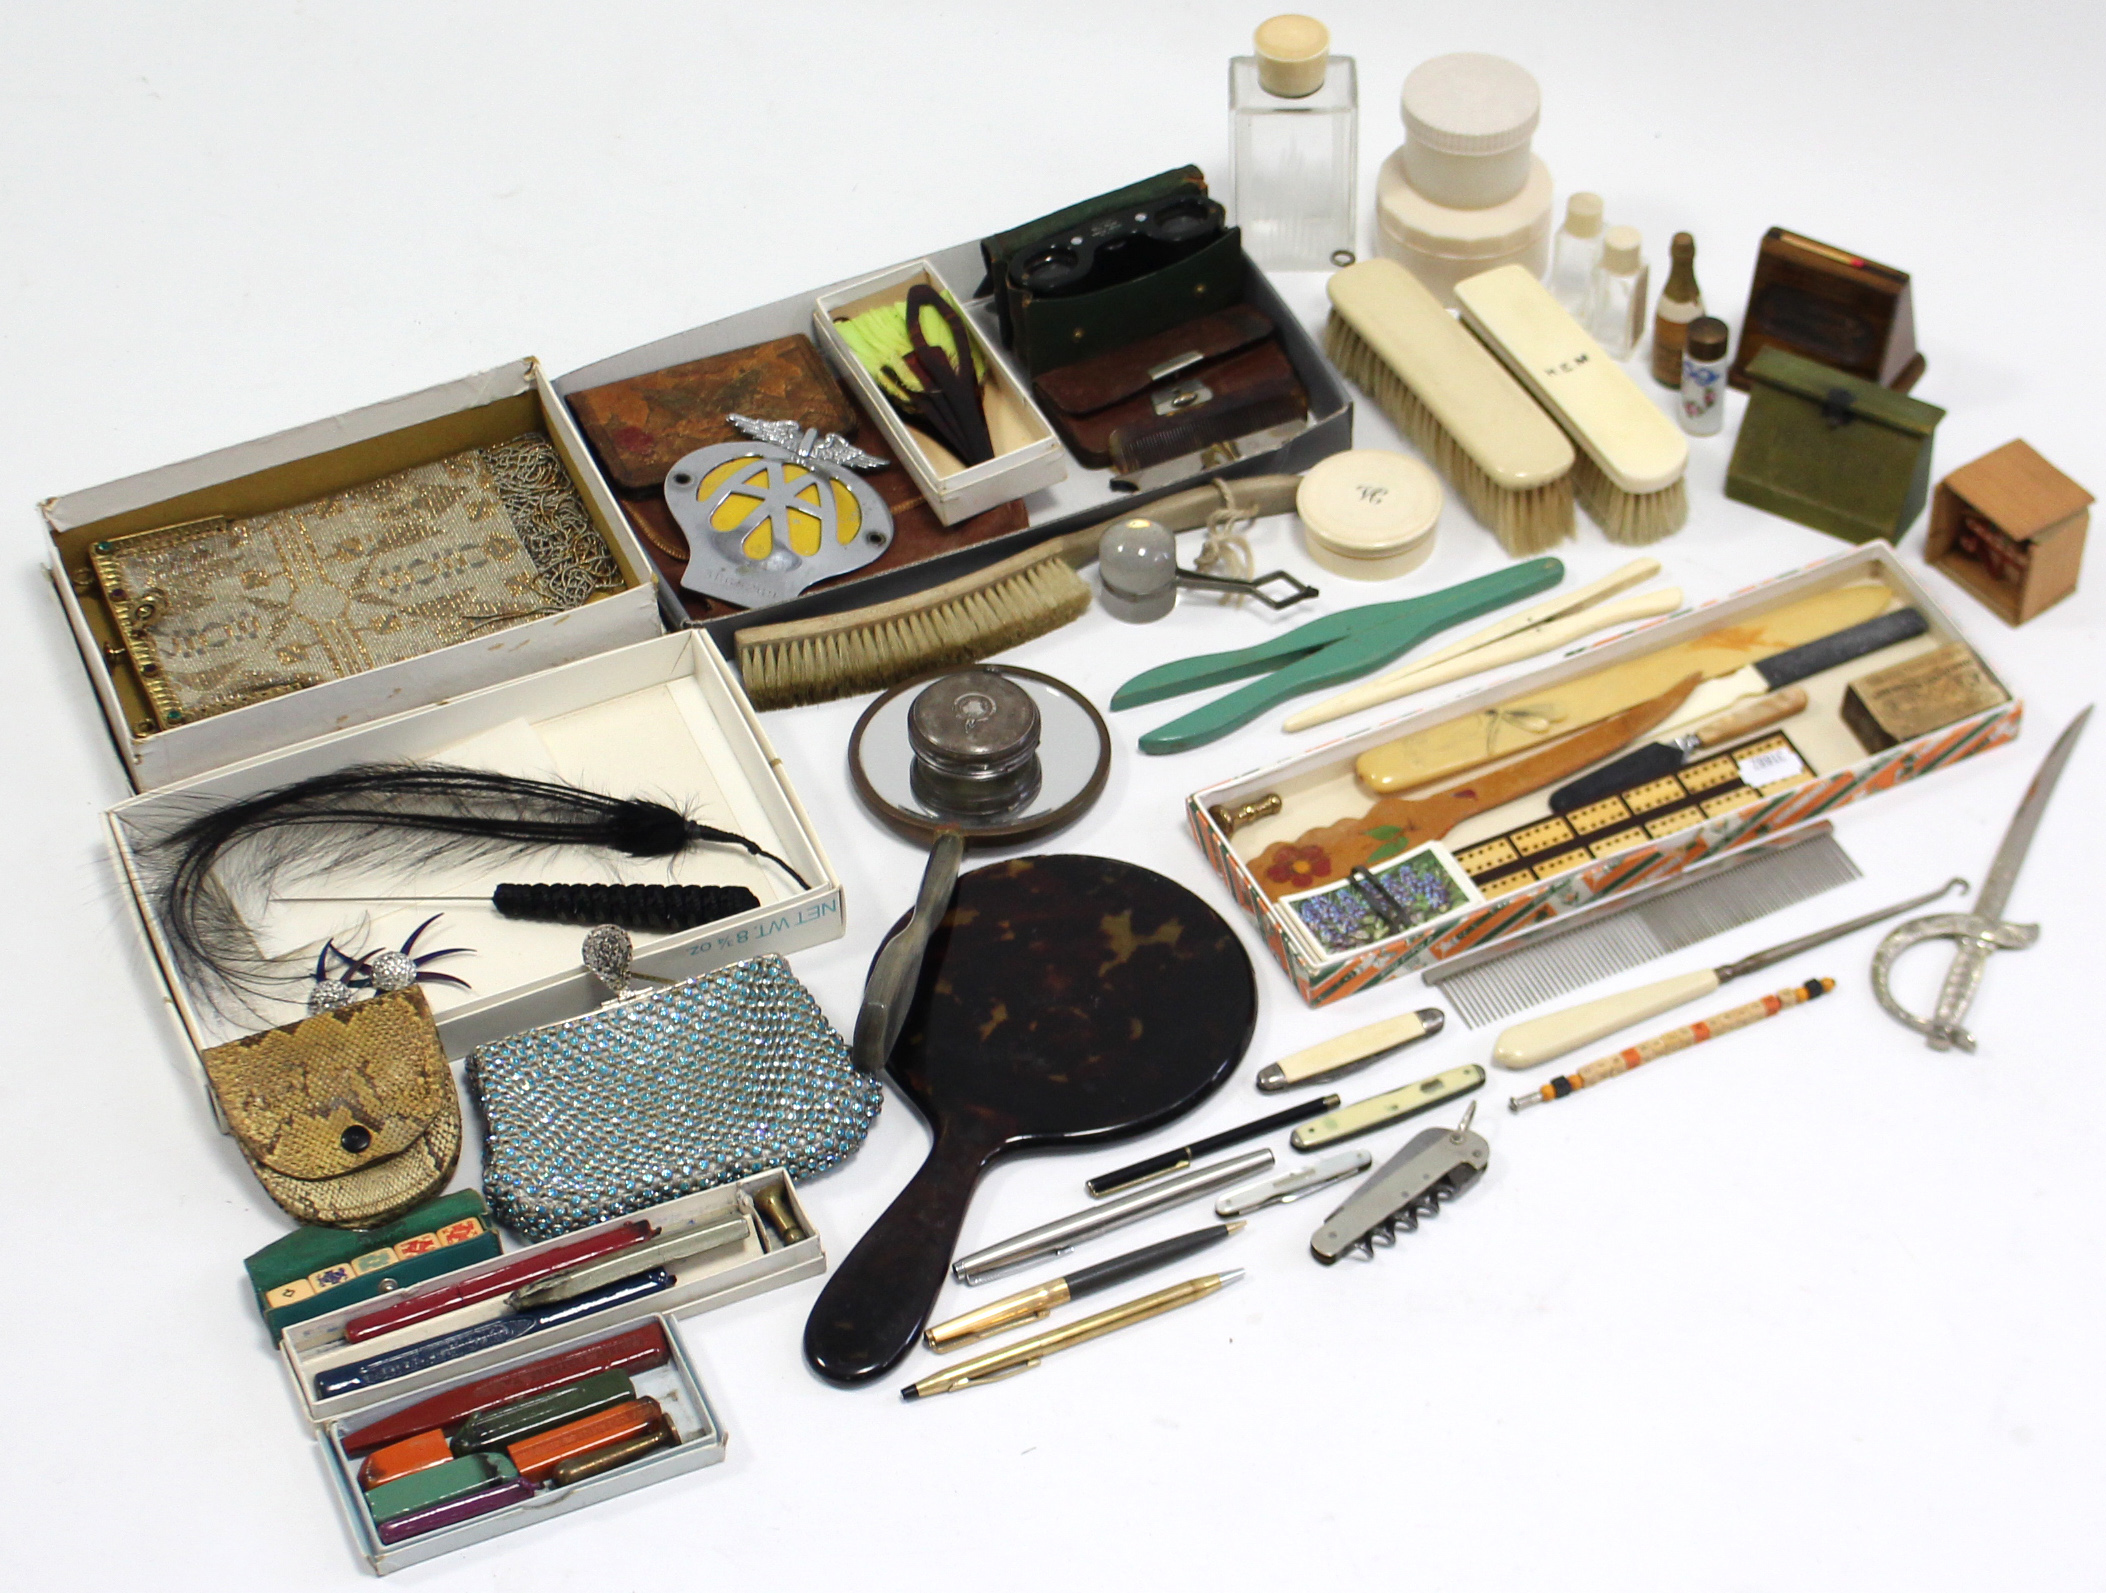 Three ball-point pens; an “AA” car membership badge; a pair of opera glasses; & sundry other items.